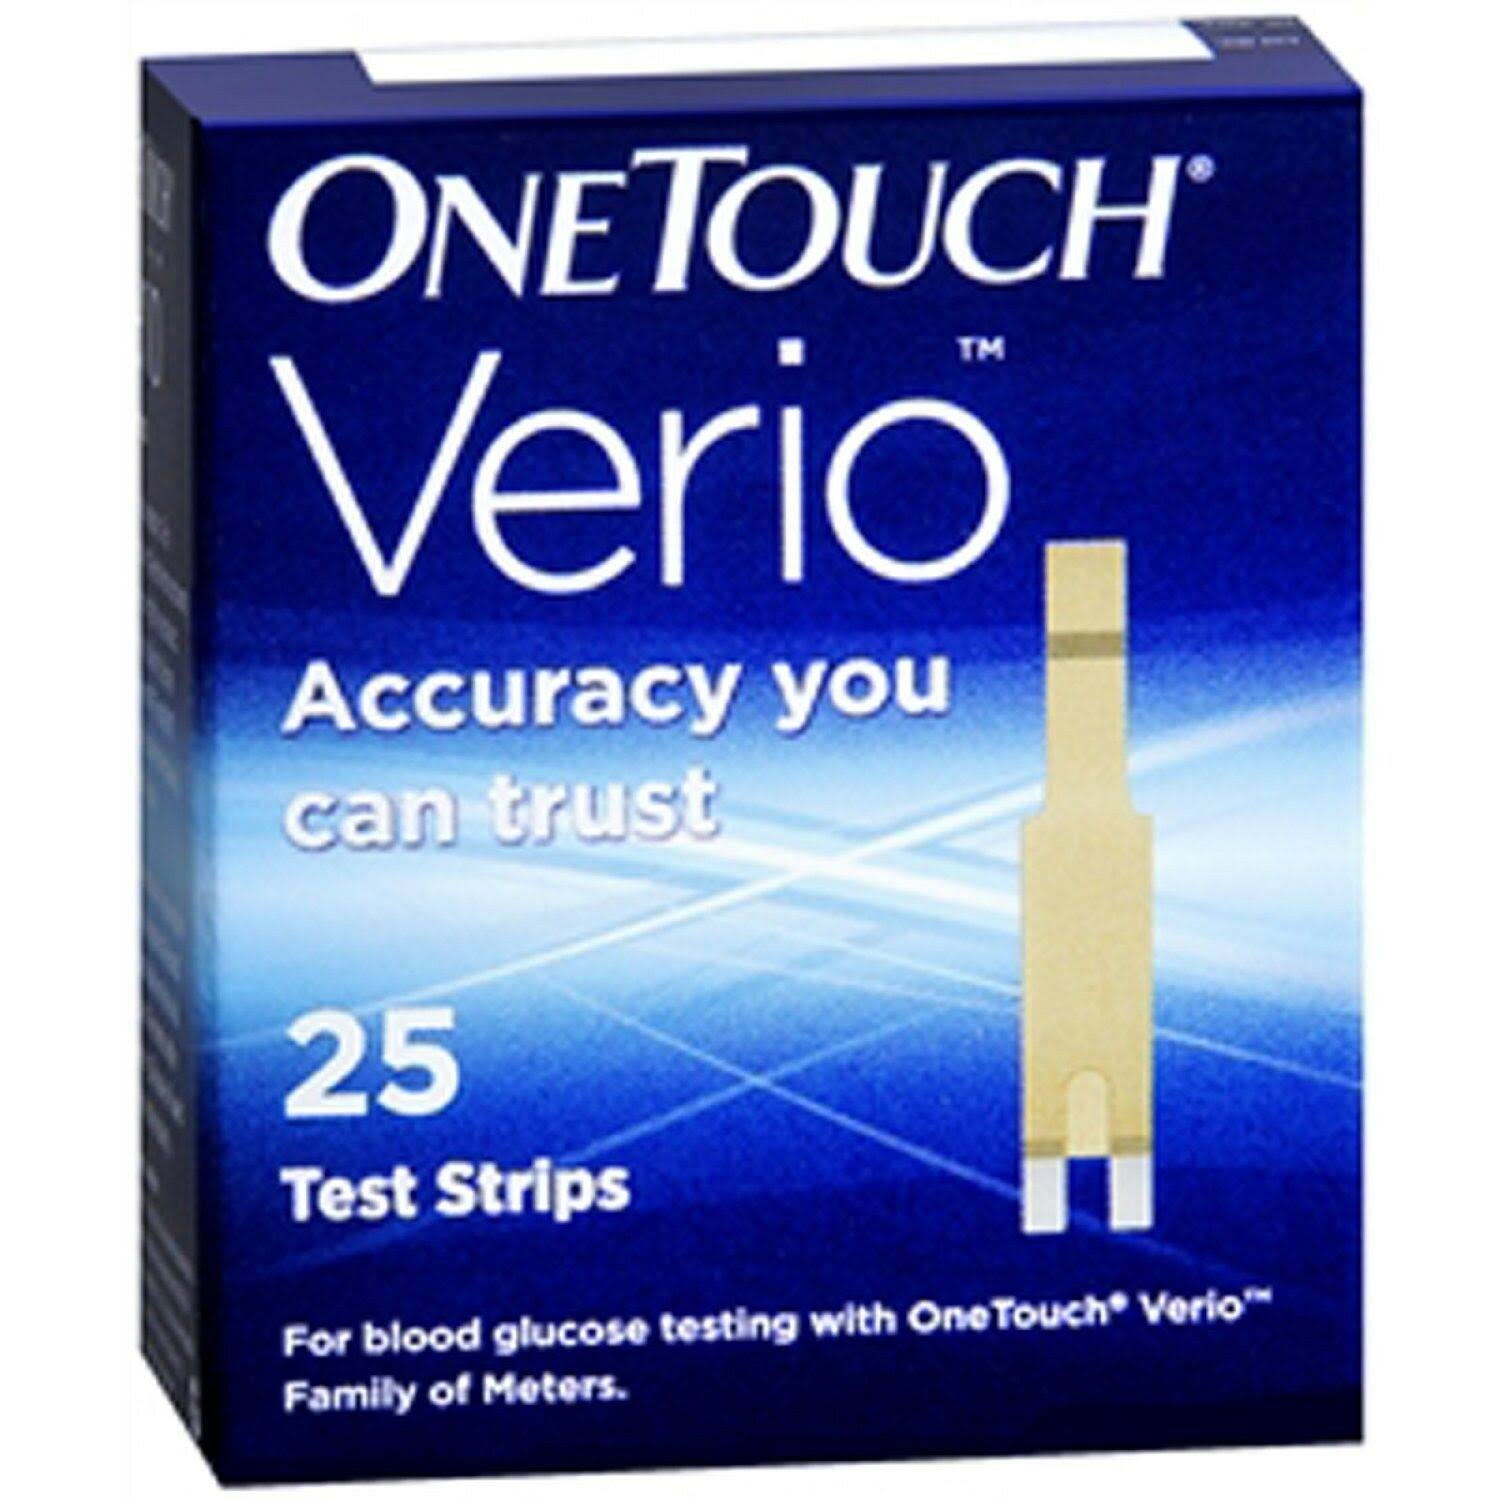 One Touch Verio Blood Glucose Test Strips - 25pk